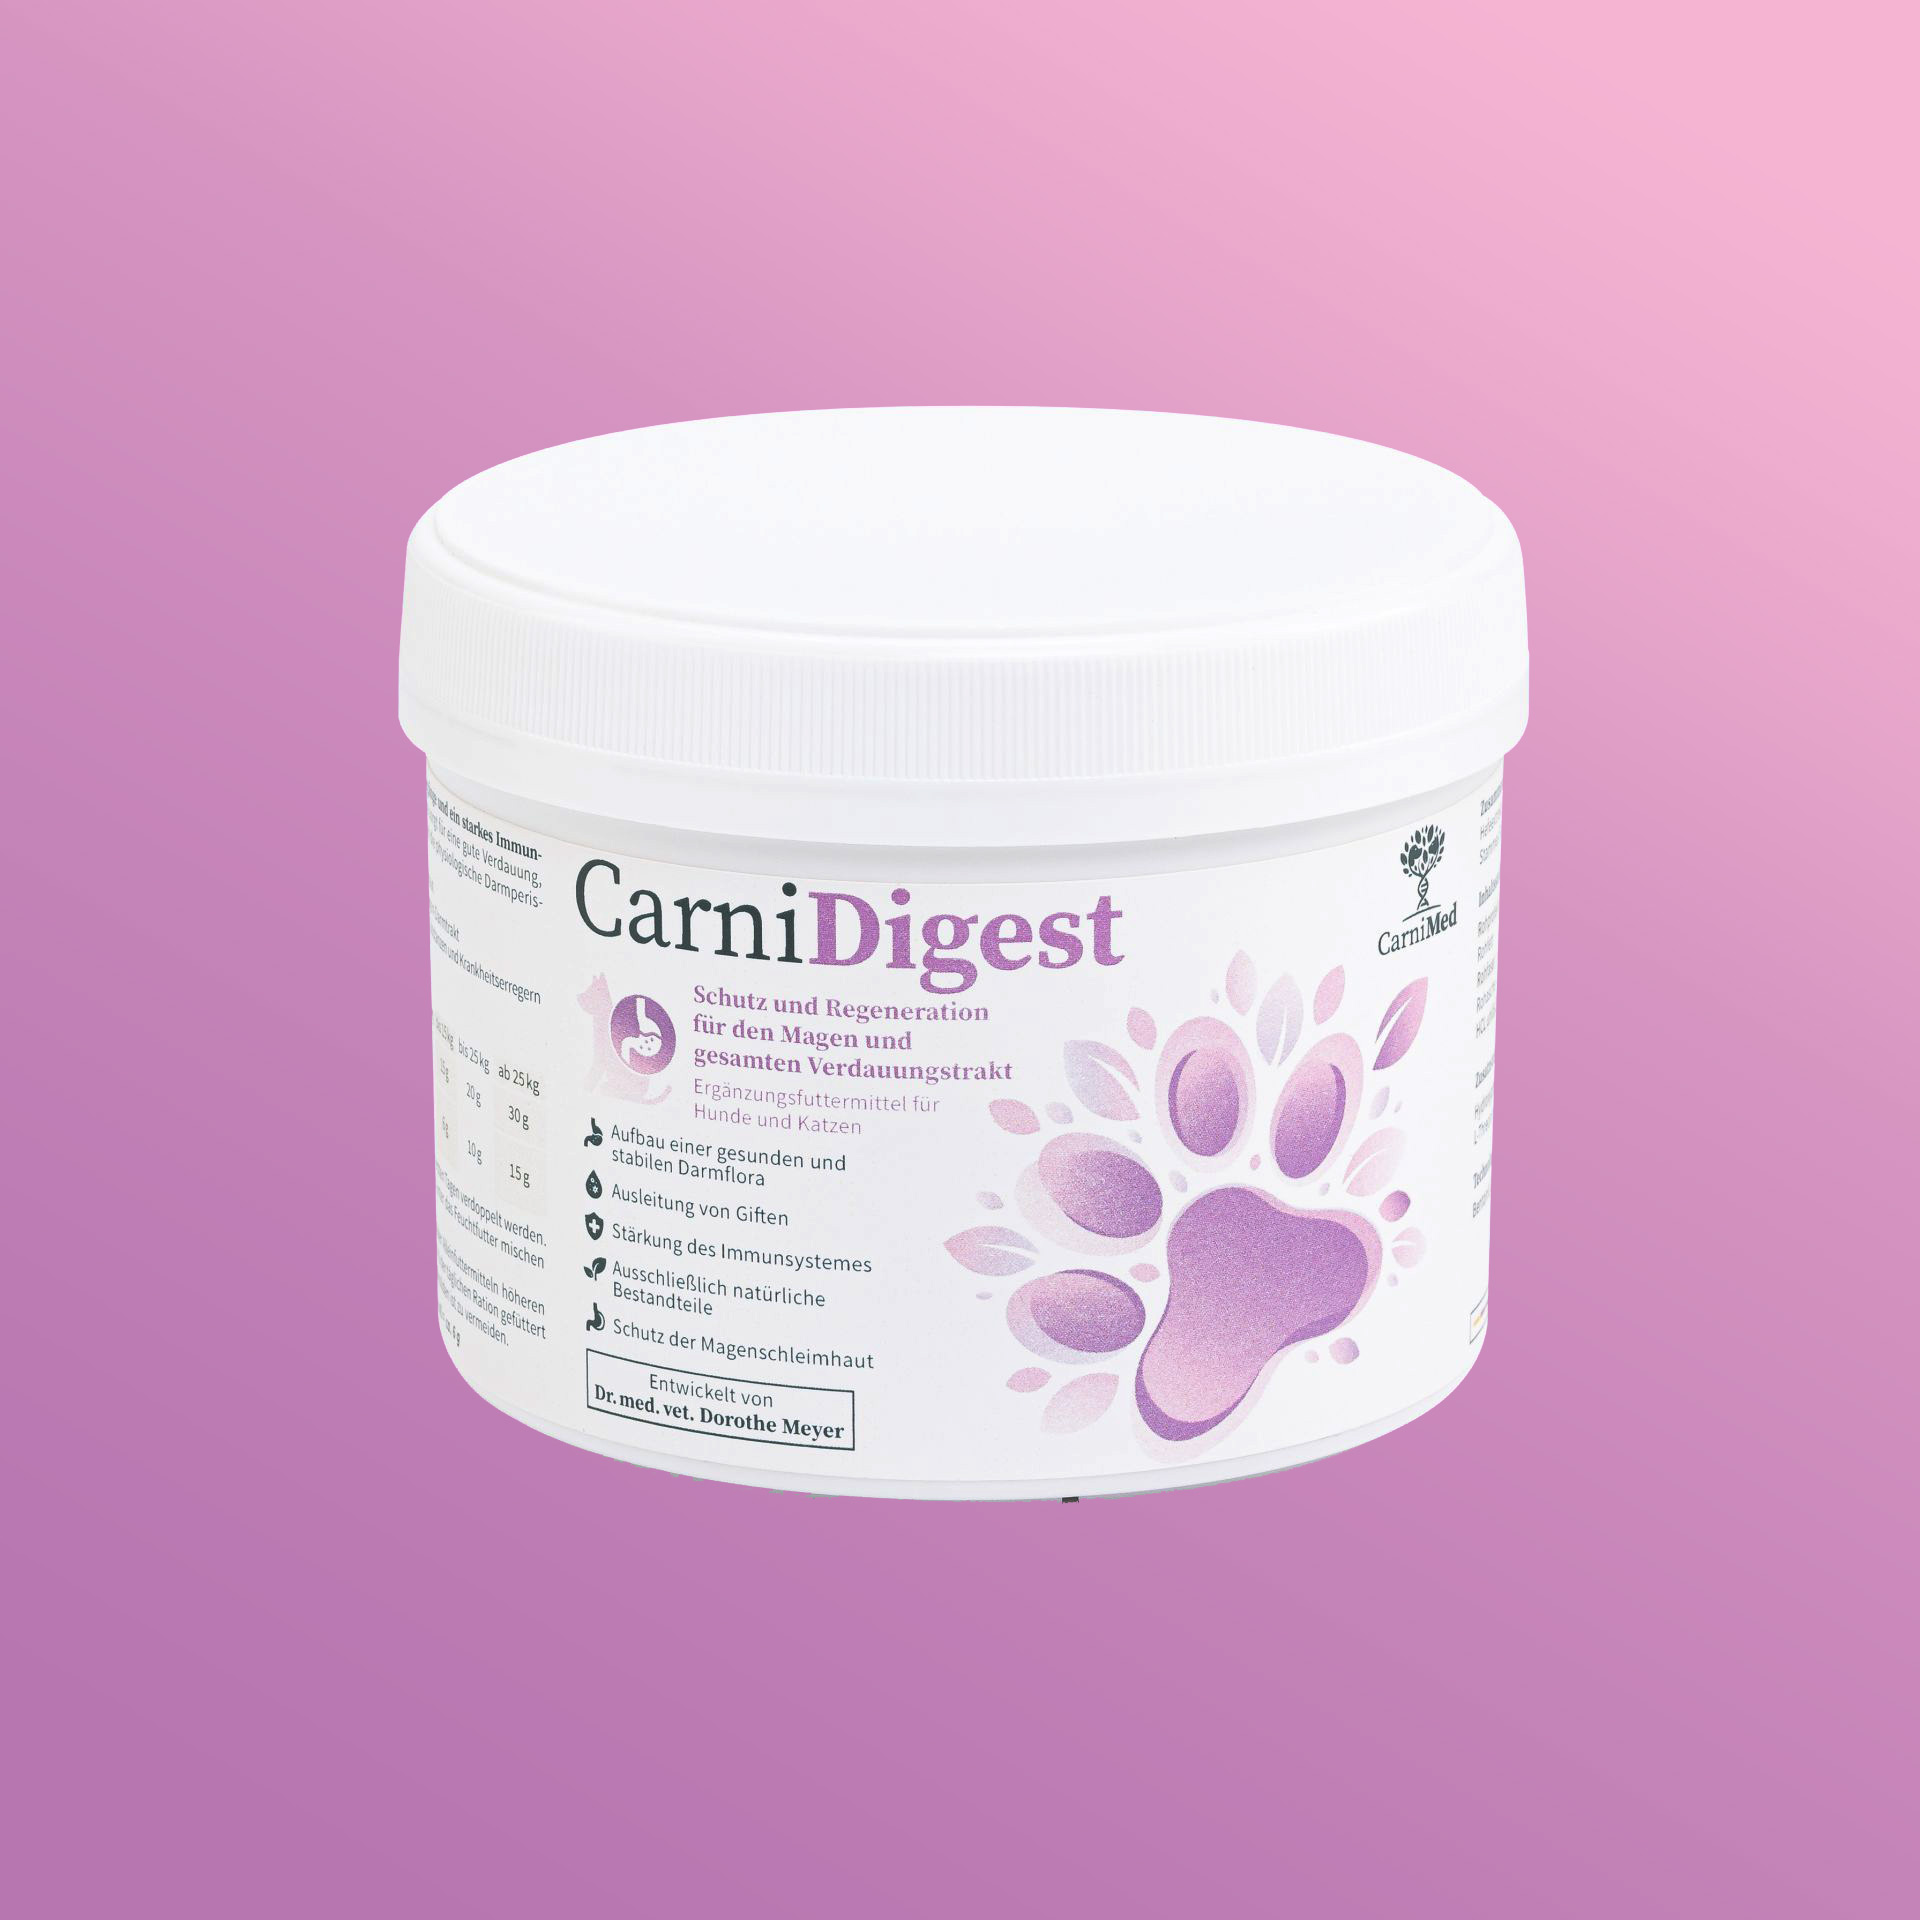 CarniDigest - Protection and regeneration for the entire digestive tract